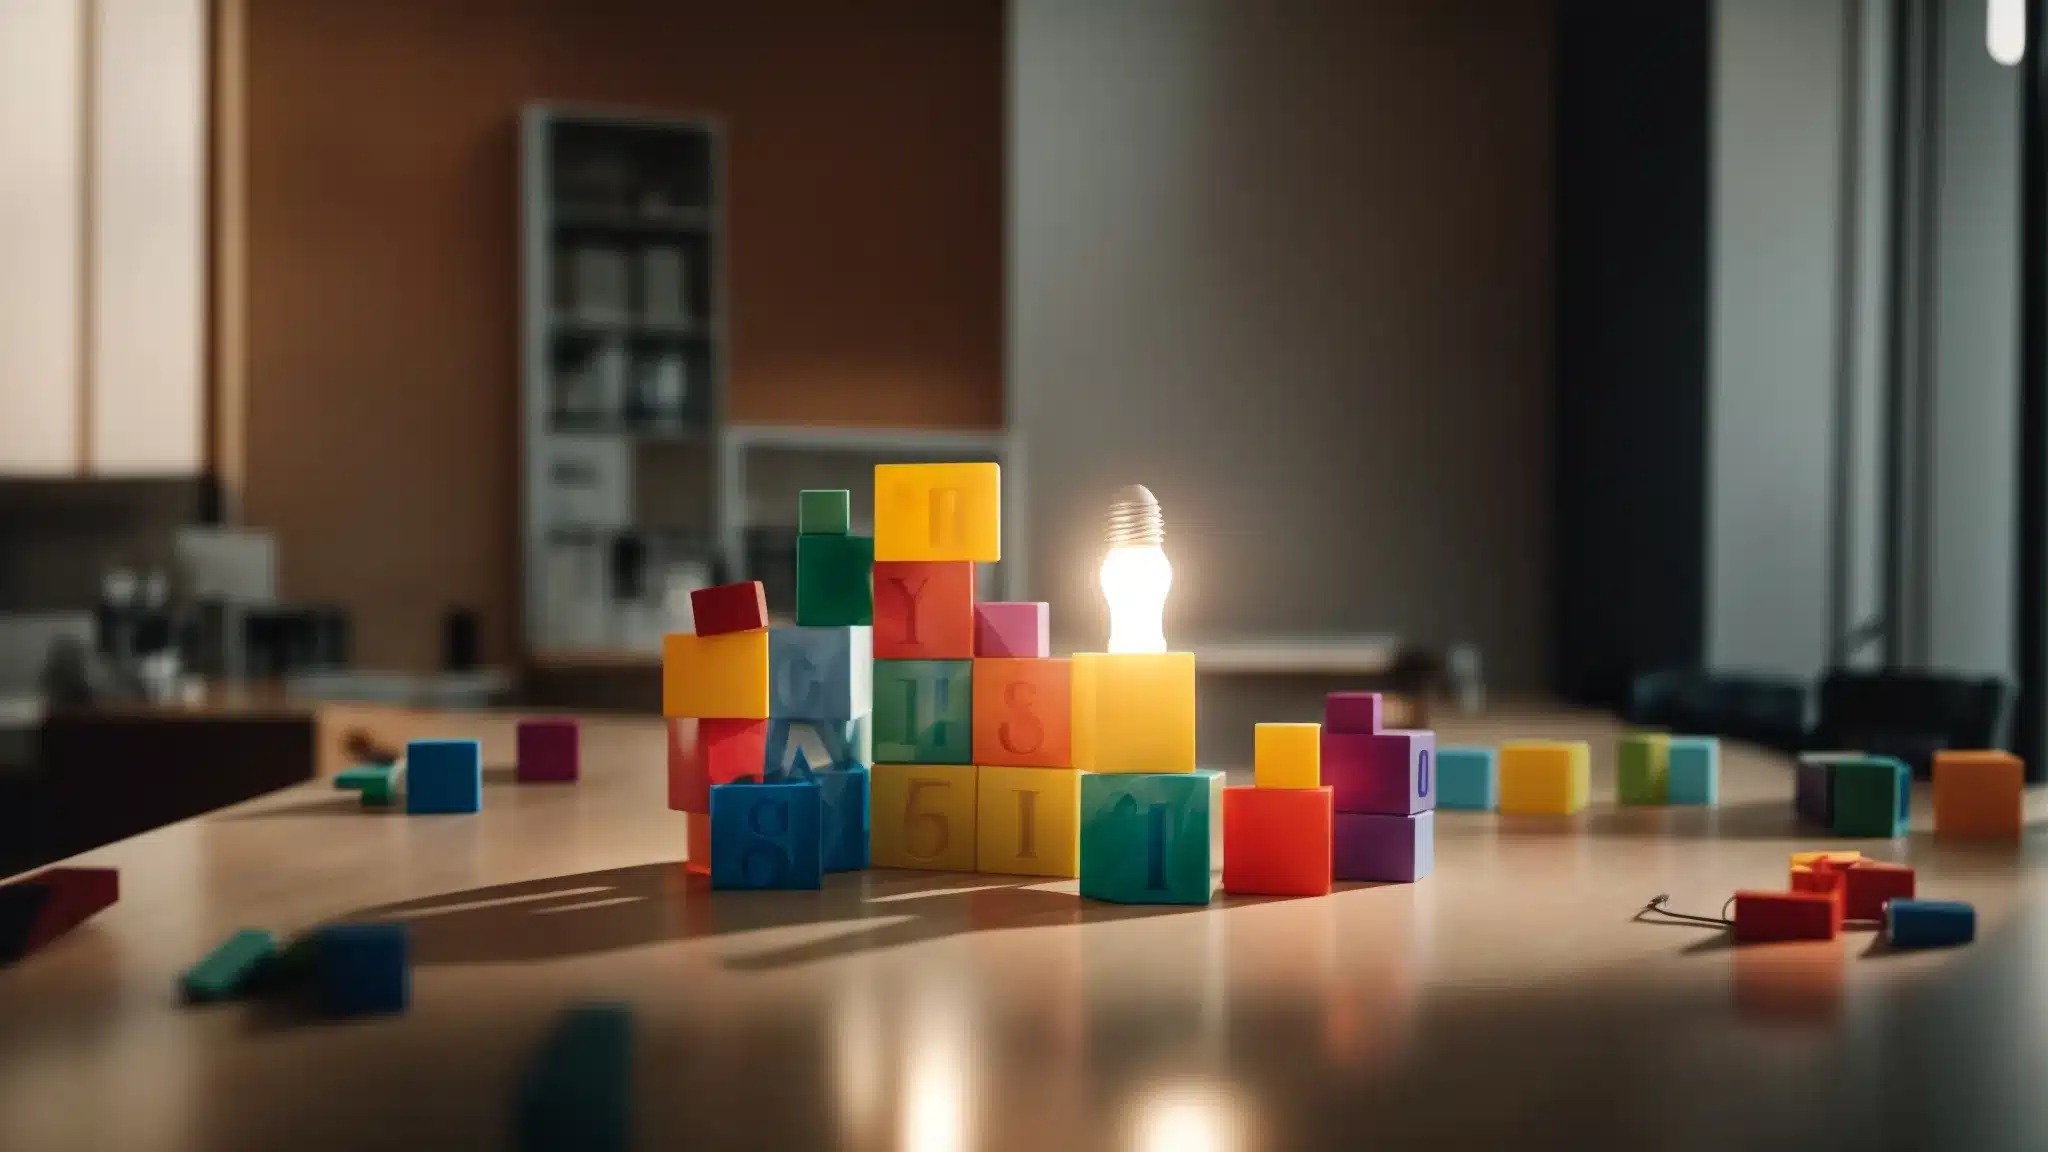 A Branding Strategist Arranging Colorful Building Blocks Emblazoned With Core Company Values Around A Glowing Light Bulb Centerpiece On A Sleek Conference Table.